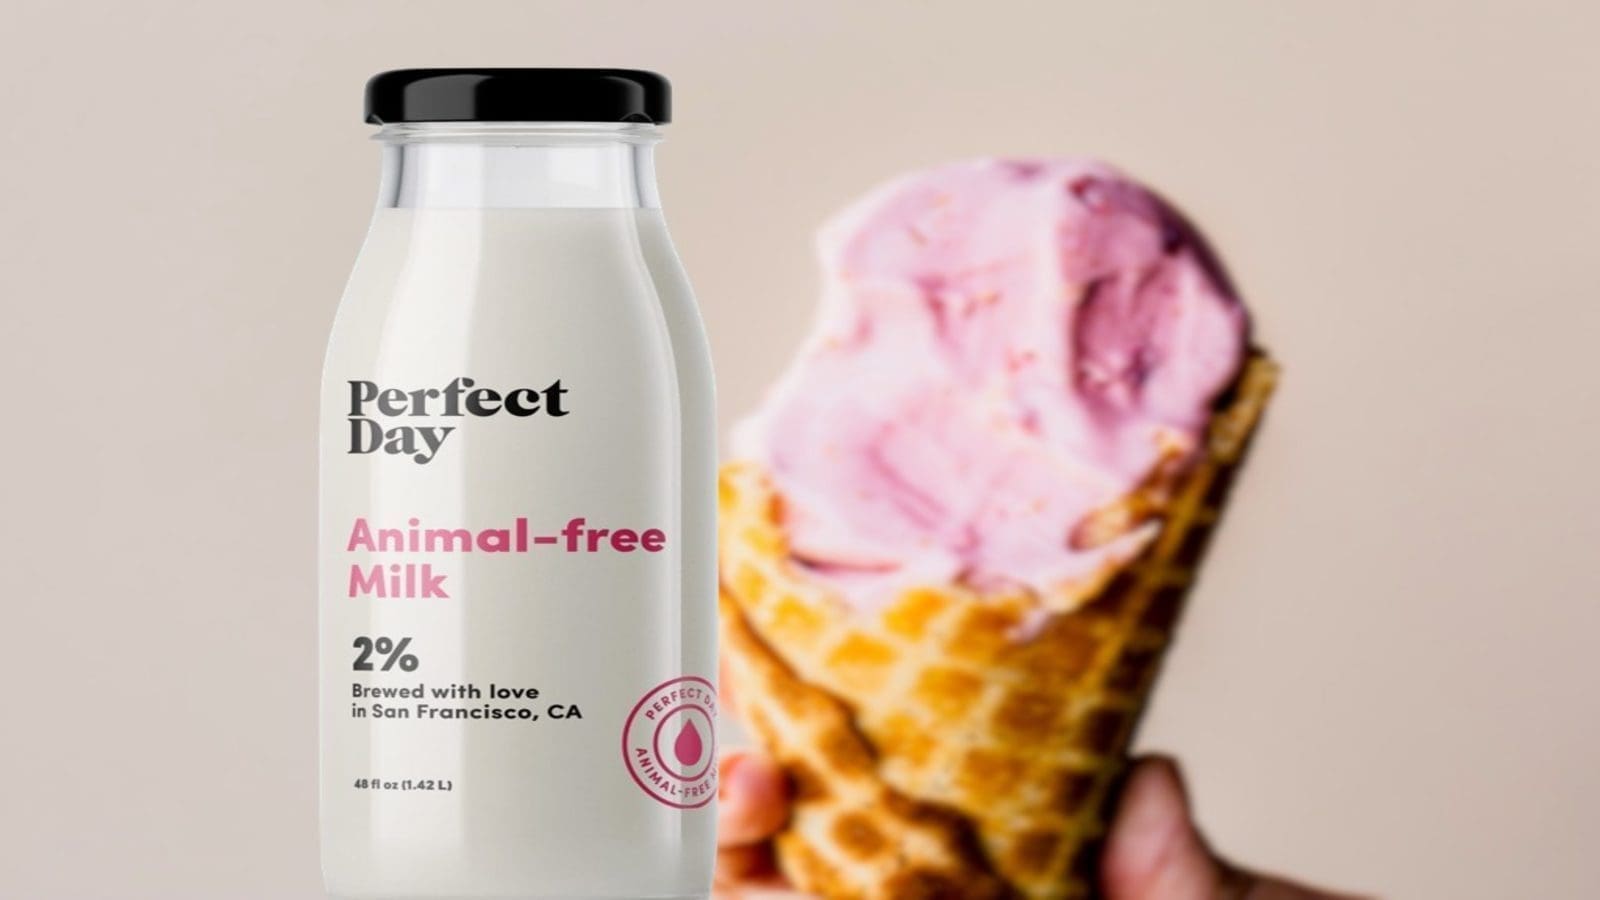 Nestlé partners with Perfect Day to produce animal-free dairy beverages